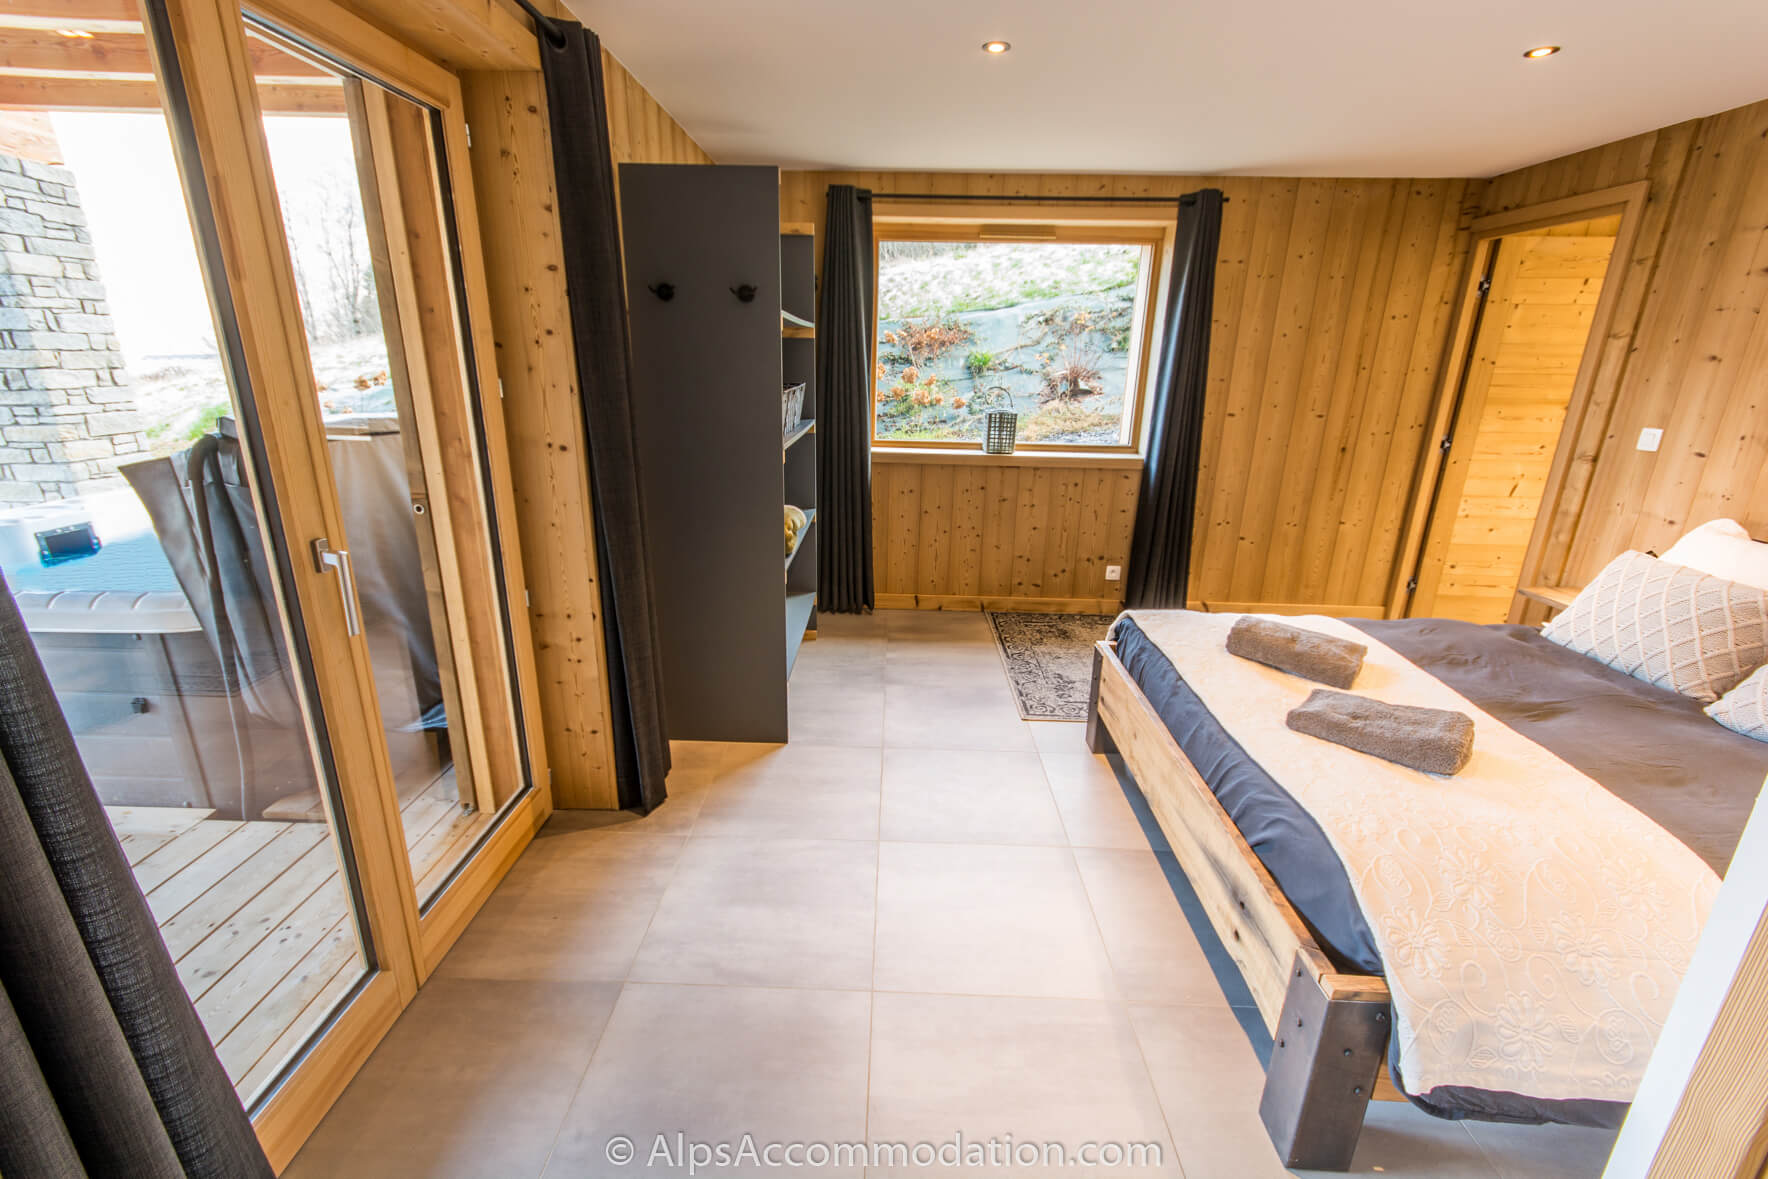 Chalet Sarbelo Samoëns - The spacious master bedroom has direct access to a covered terrace with hot tub